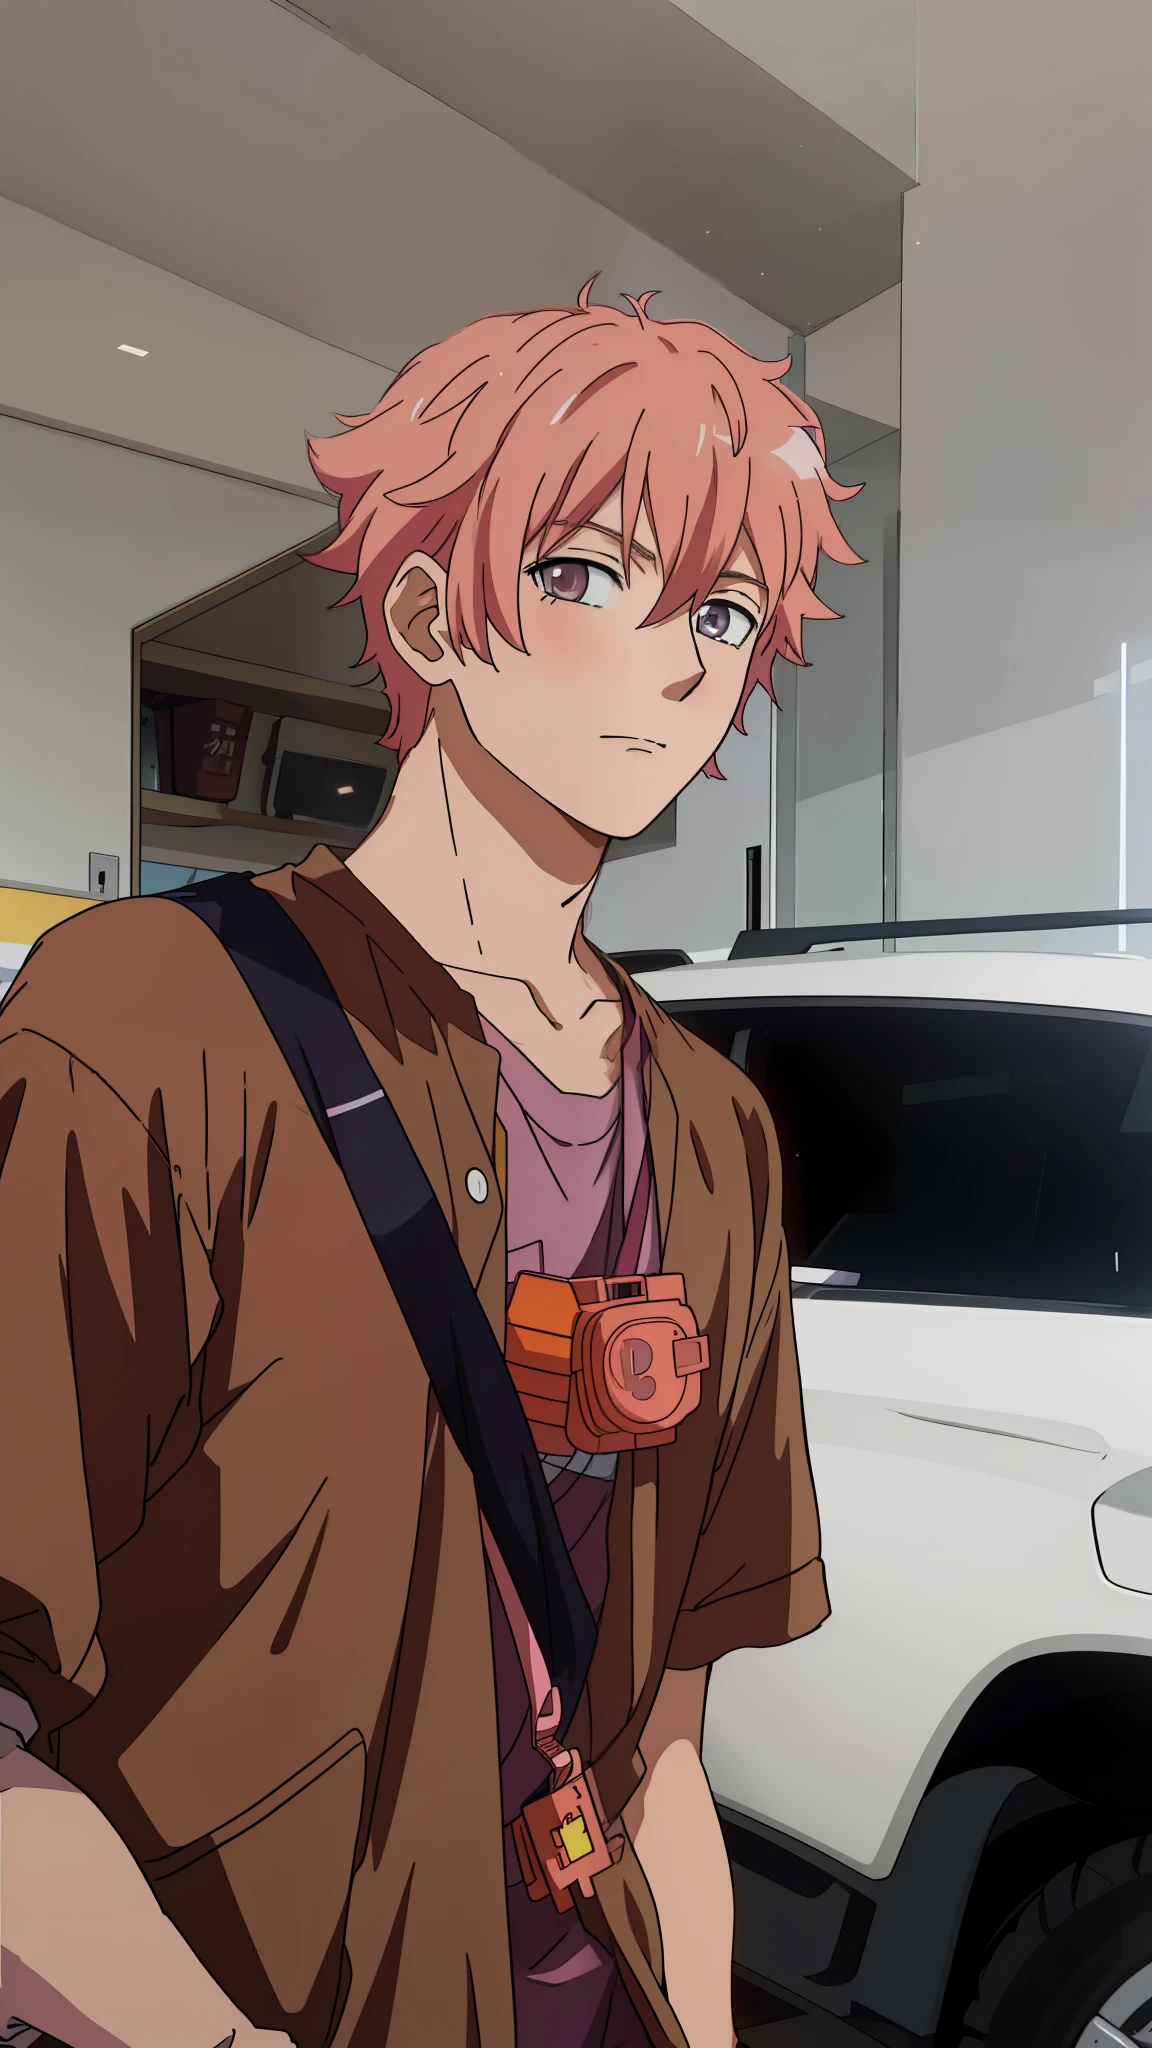 Anime image of a man with pink hair standing in front of a white SUV, official anime still, orange - haired anime boy, 8K!, official studio anime still, Today's featured anime stills, still from tv anime, in the anime film, nobutaka ike, key anime visuals, miura kentaro style, animated still, miura kentaro style